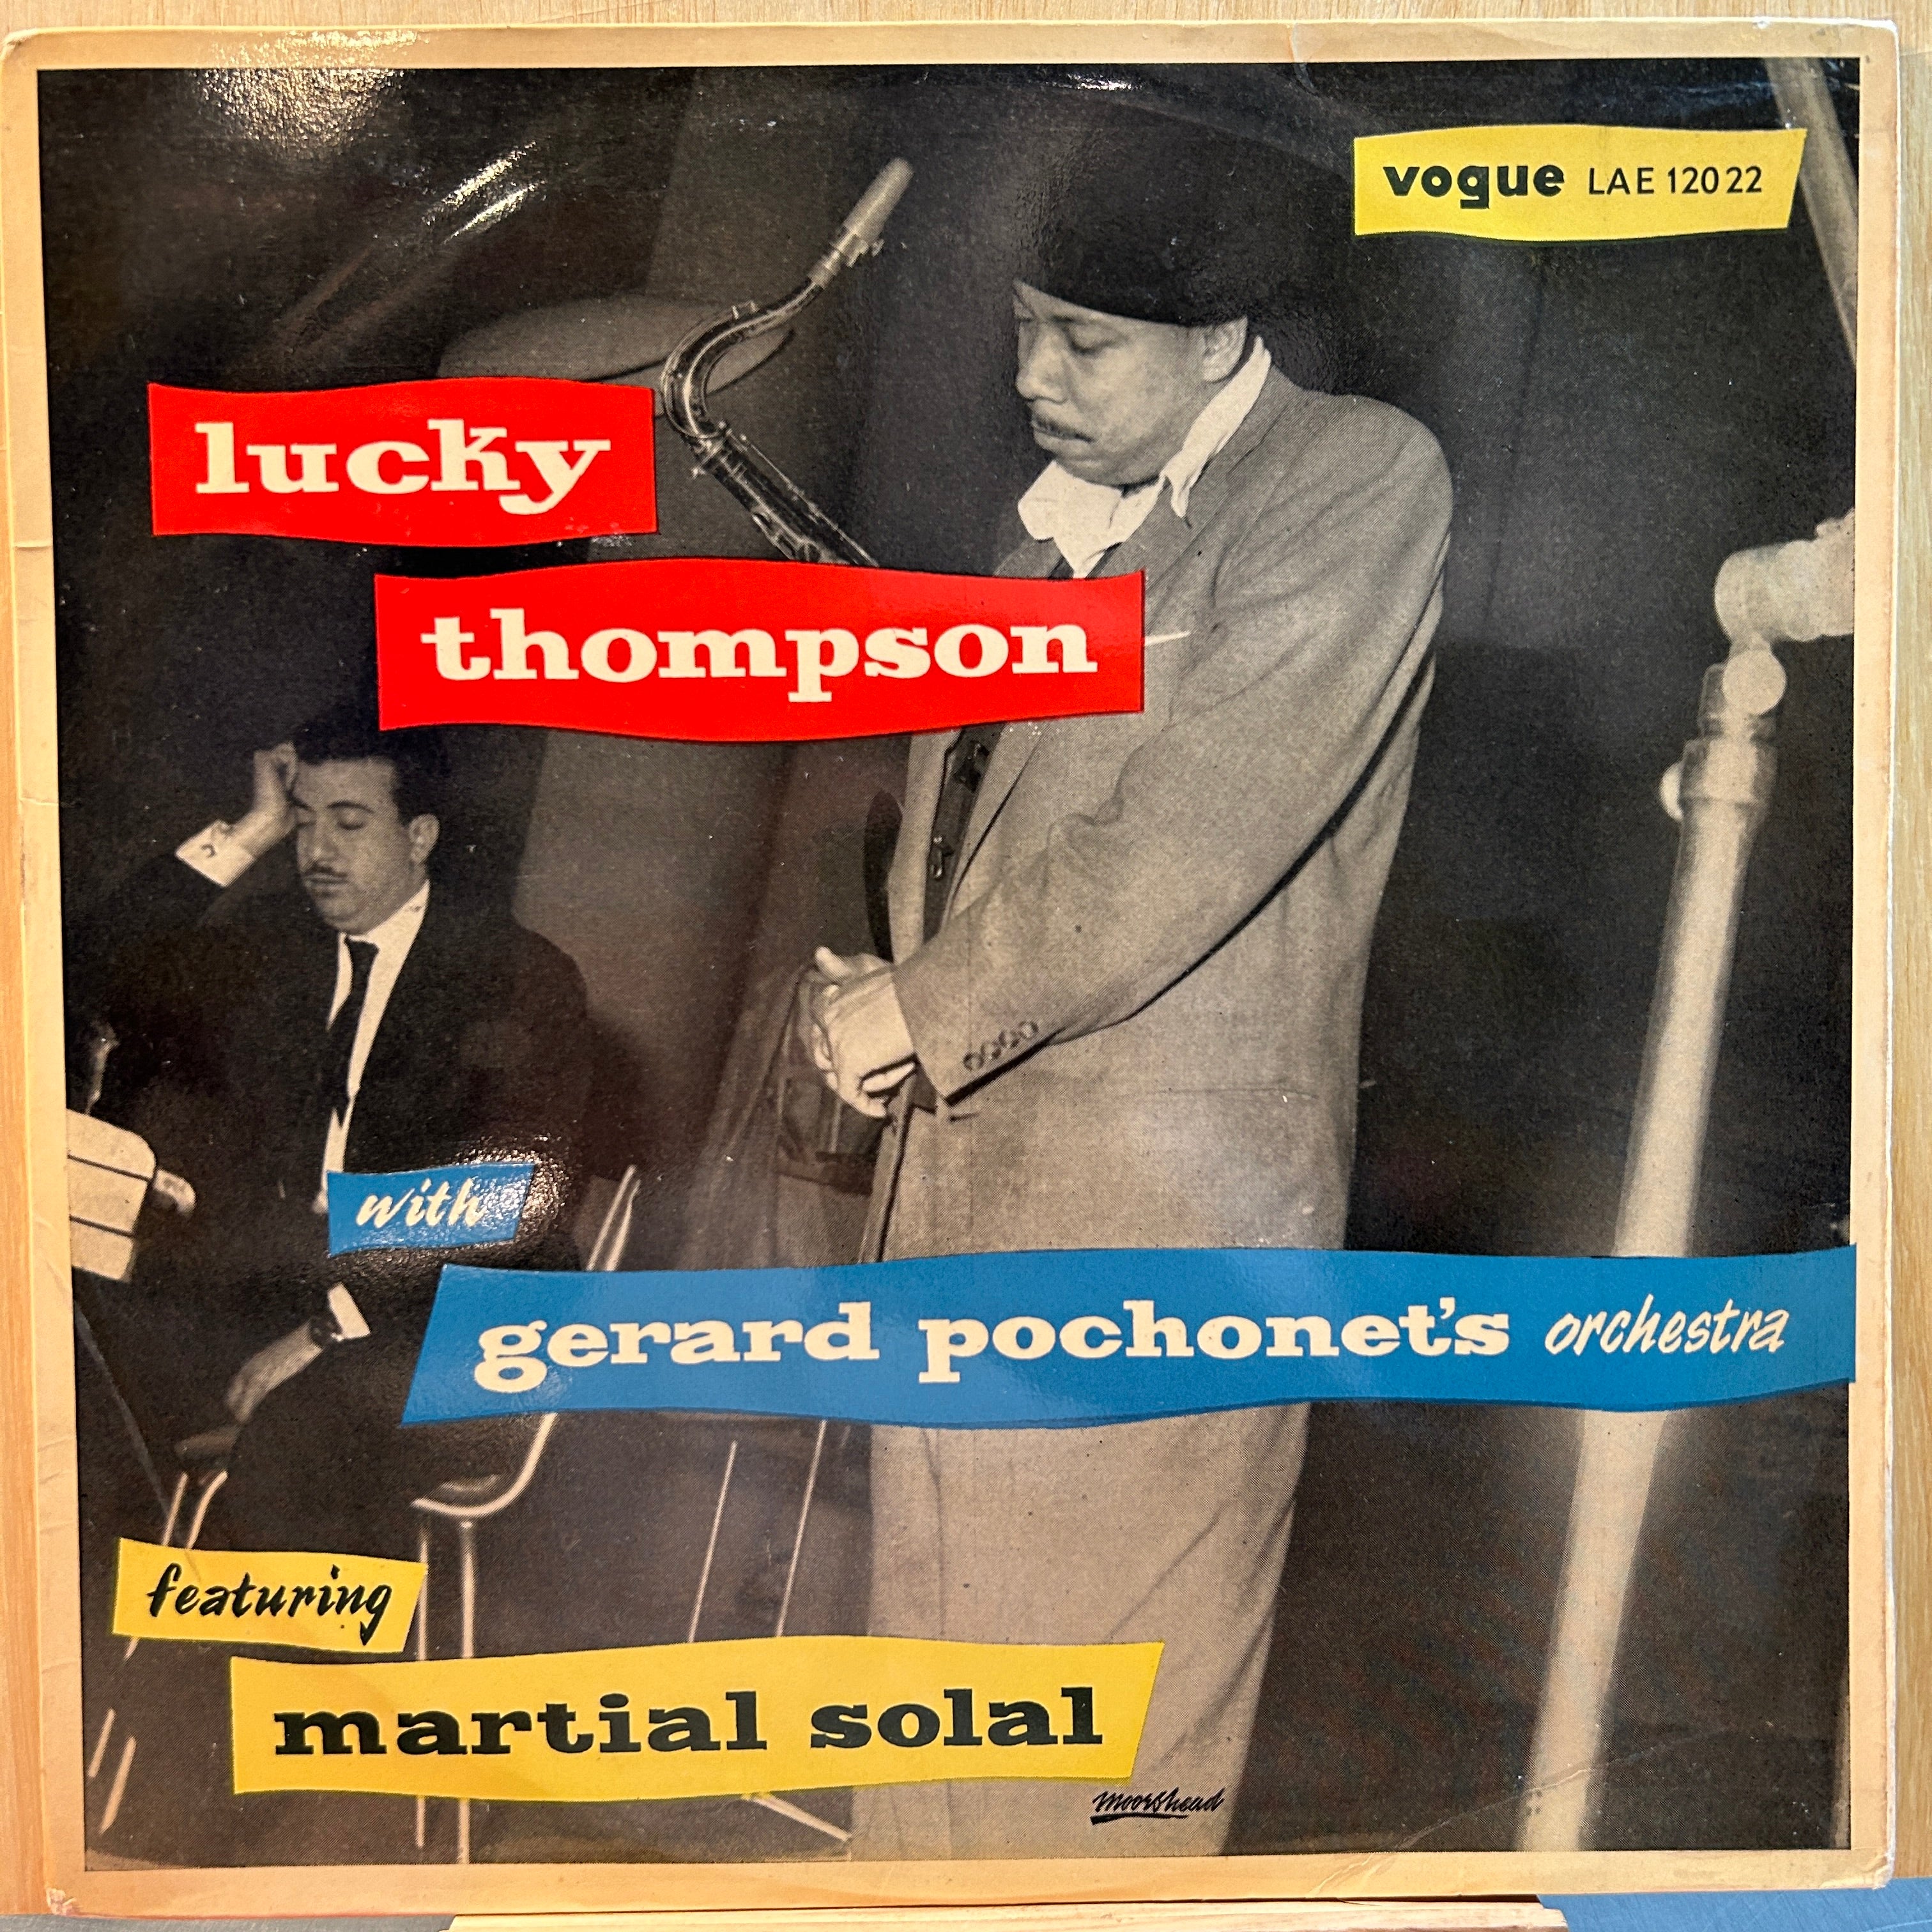 Lucky Thompson With Gerard Pochonet's Orchestra